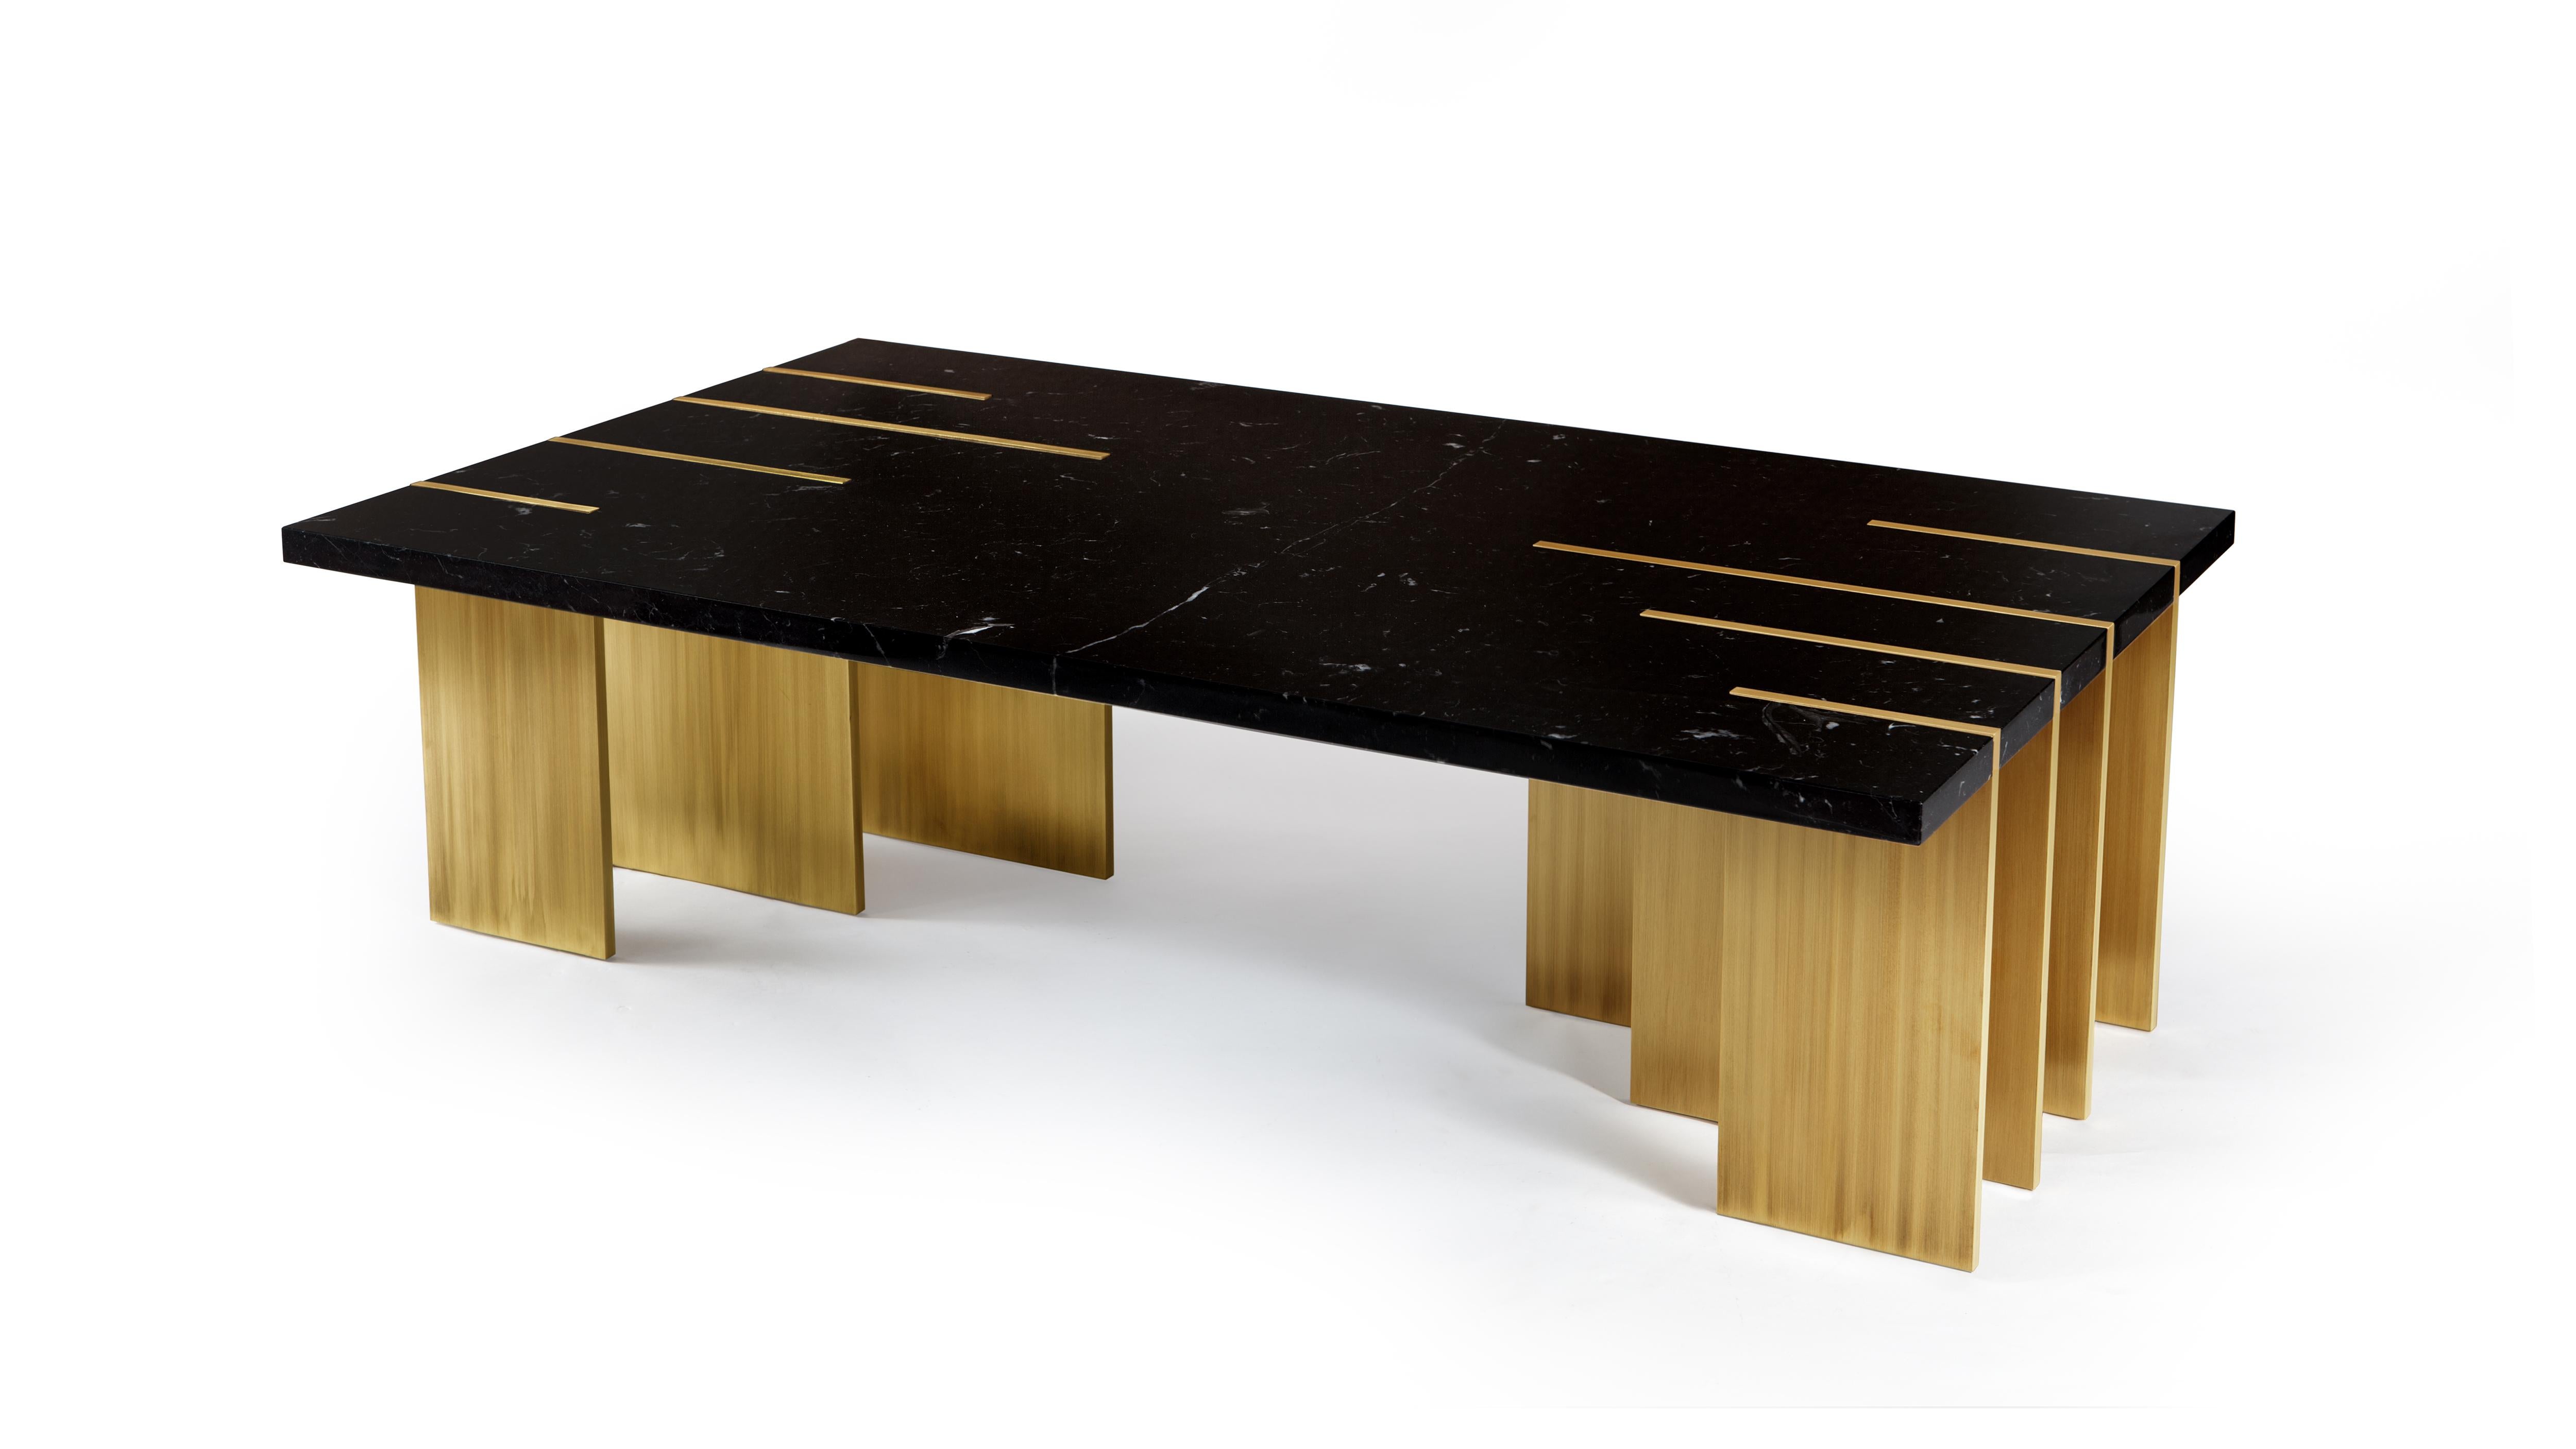 Pianist Nero Marquina Marble Coffee Table by InsidherLand
Dimensions: D 75 x W 130 x H 38 cm.
Materials: Nero Marquina marble, oxidized brushed brass.
115 kg.
Other marbles are available.

The Pianist coffee table, doesn't represent the piano but